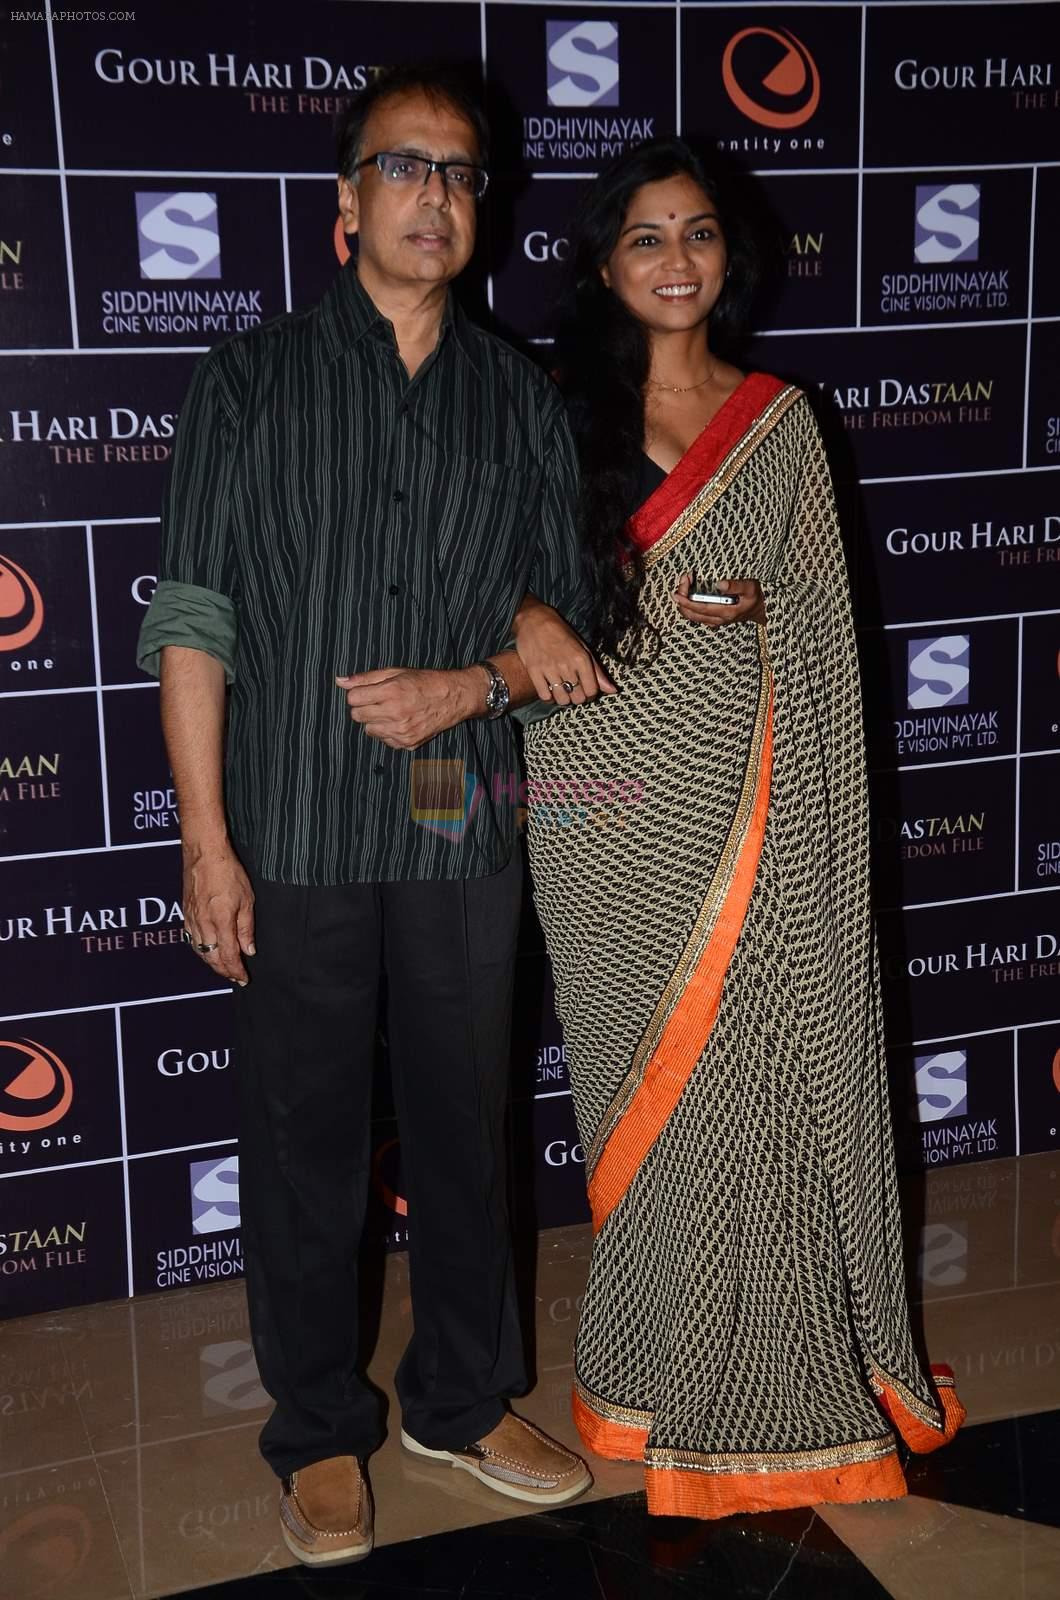 Usha Jadhav at the Premiere of the film Gour Hari Dastaan in PVR, Juhu on 12th Aug 2015